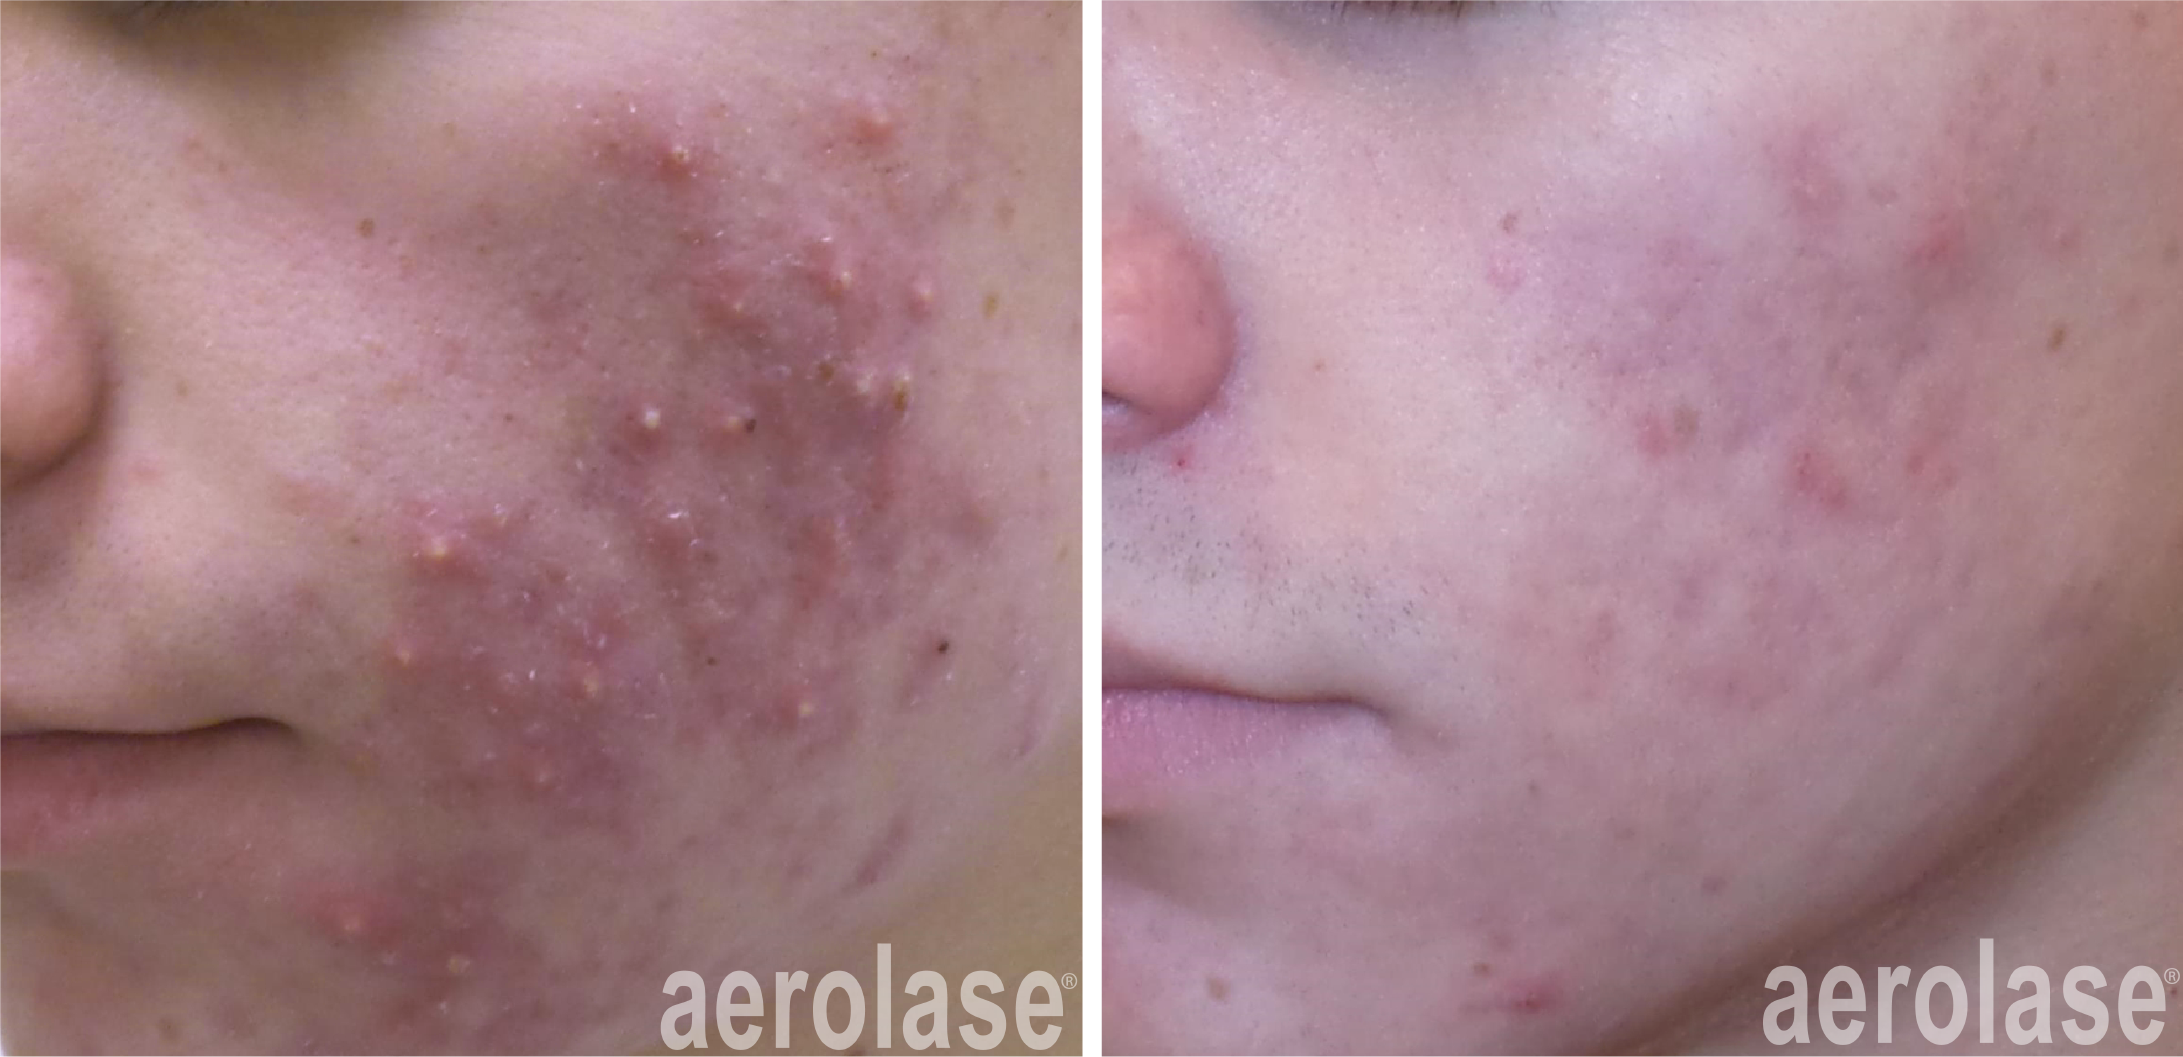 aerolase-kevin-pinski-before-after-acne-4-treatments.png